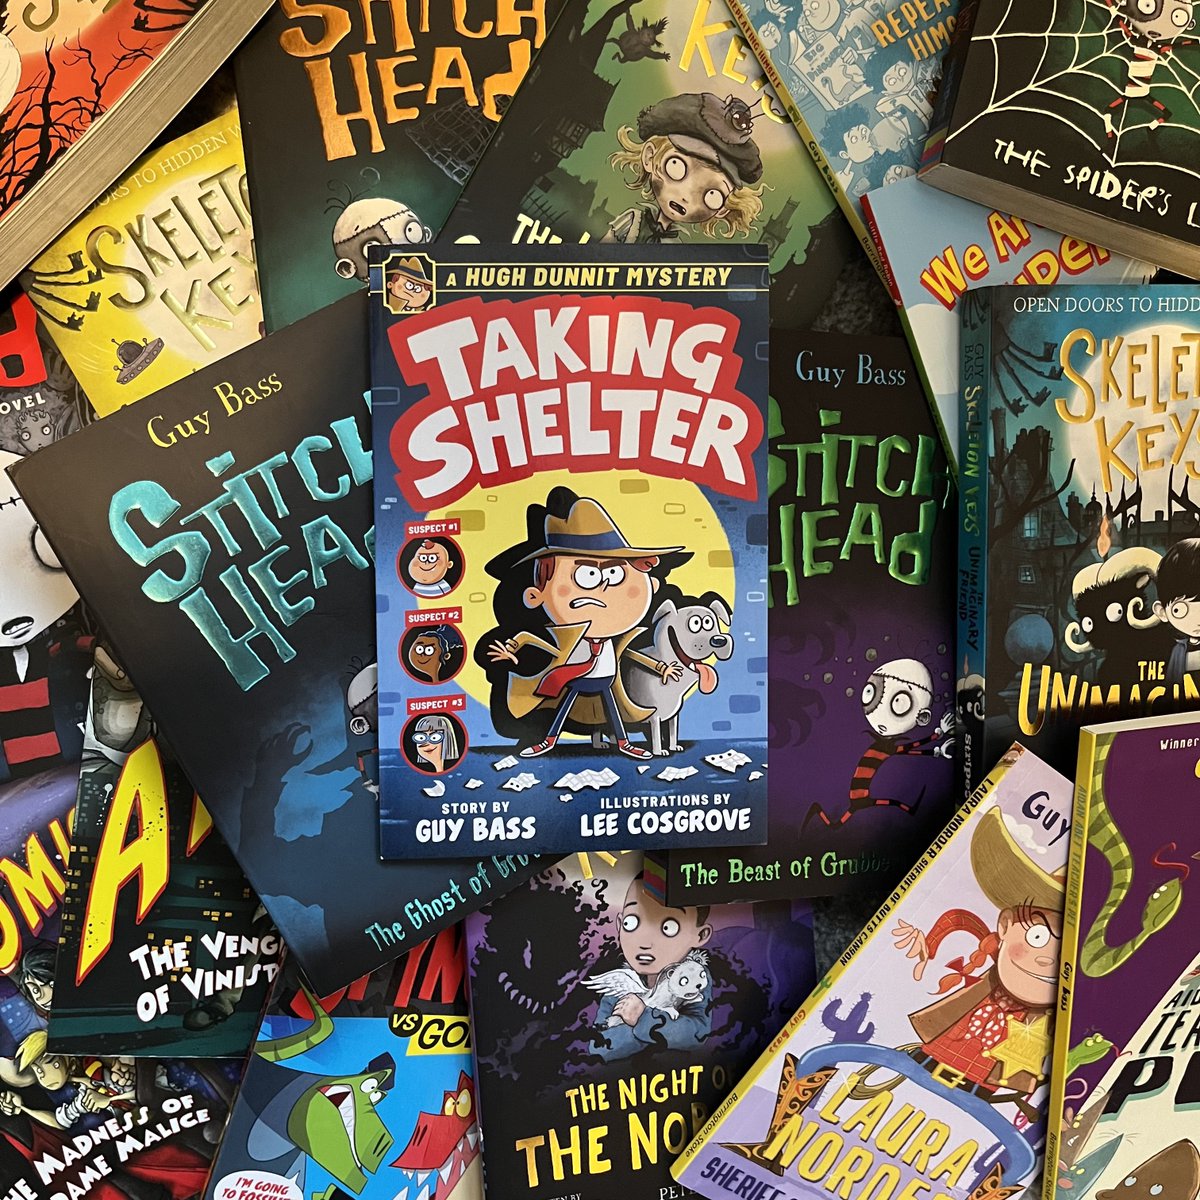 Another brilliant book to add to my bulging Bass back catalogue! Can’t wait to dive into A Hugh Dunnit Mystery: Taking Shelter. Who knew? Hugh knew. 🕵🏻‍♂️🔍🐕📕📚 #Book #GuyBass #HughDunnit #KidsLit #Author #Bookstagram @GuyBassBooks @AndersenPress